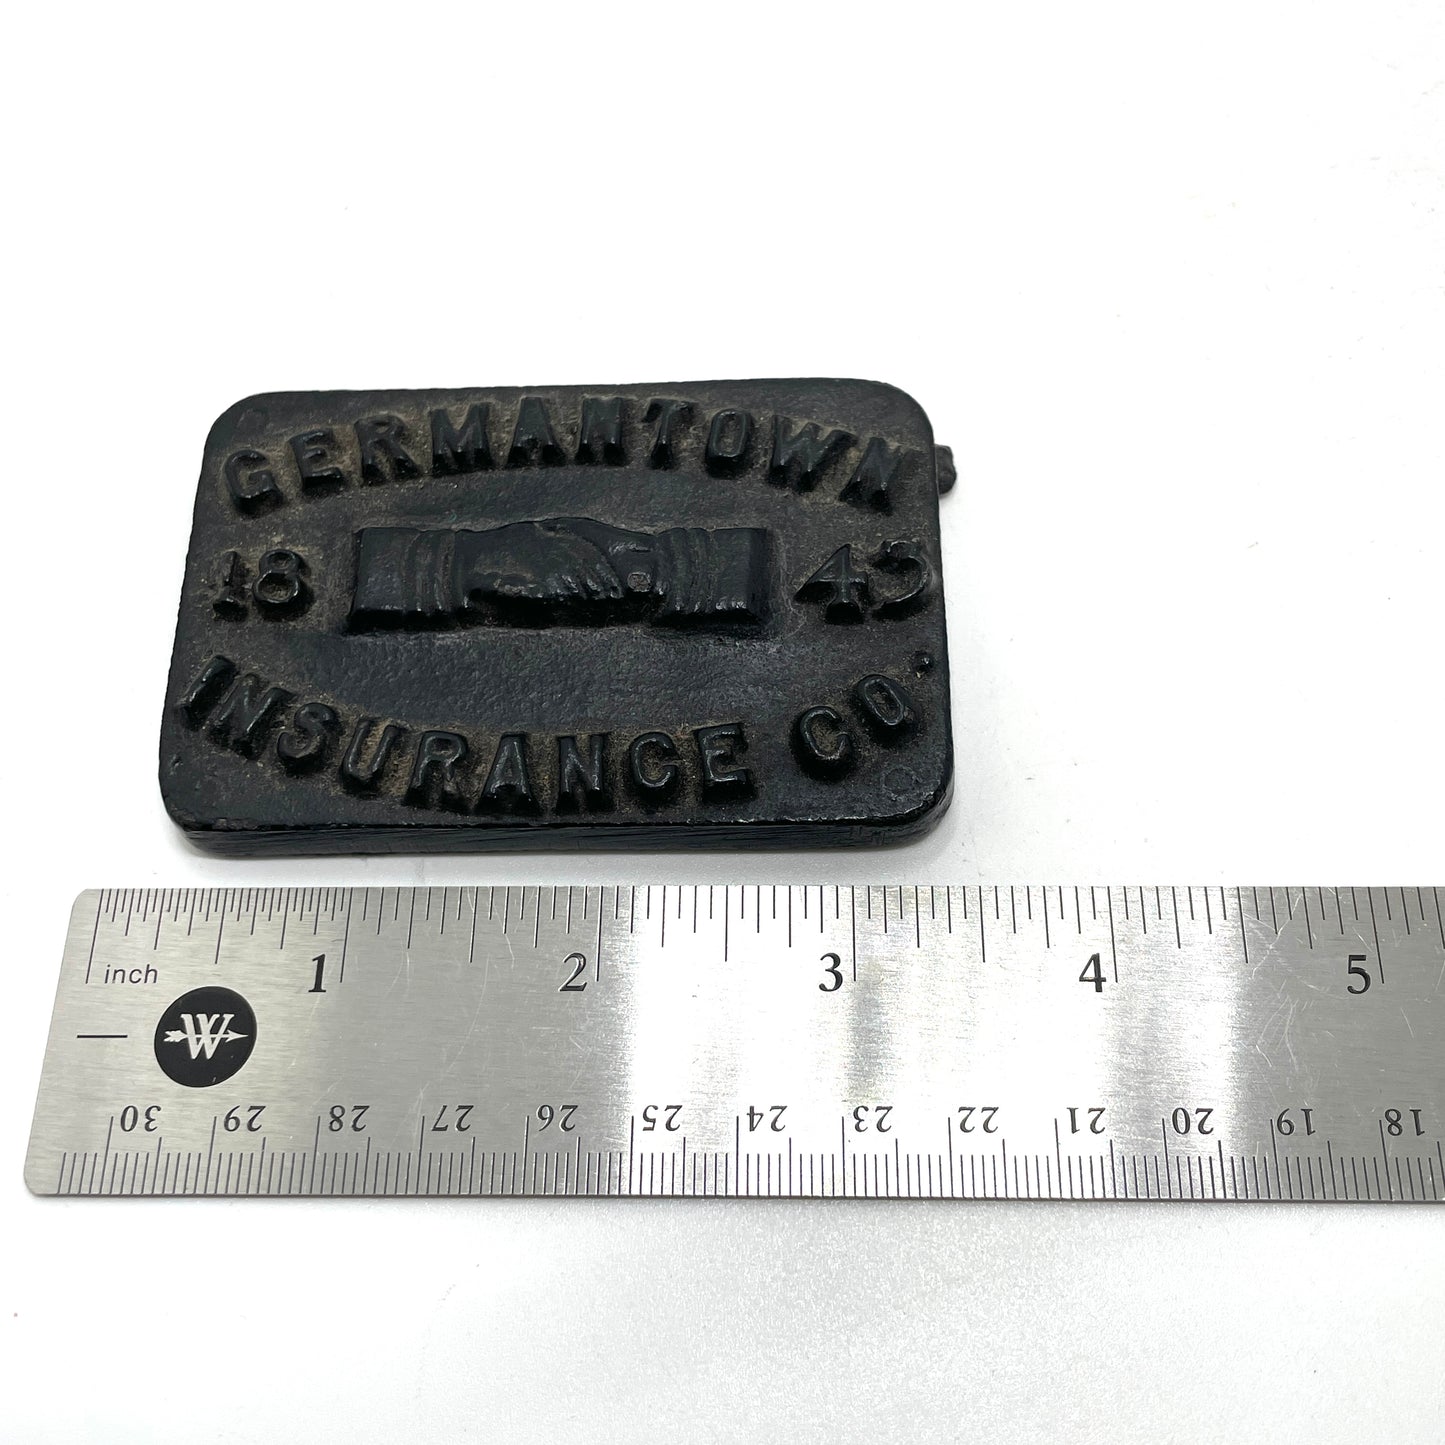 Vintage Germantown Insurance Company Paperweight